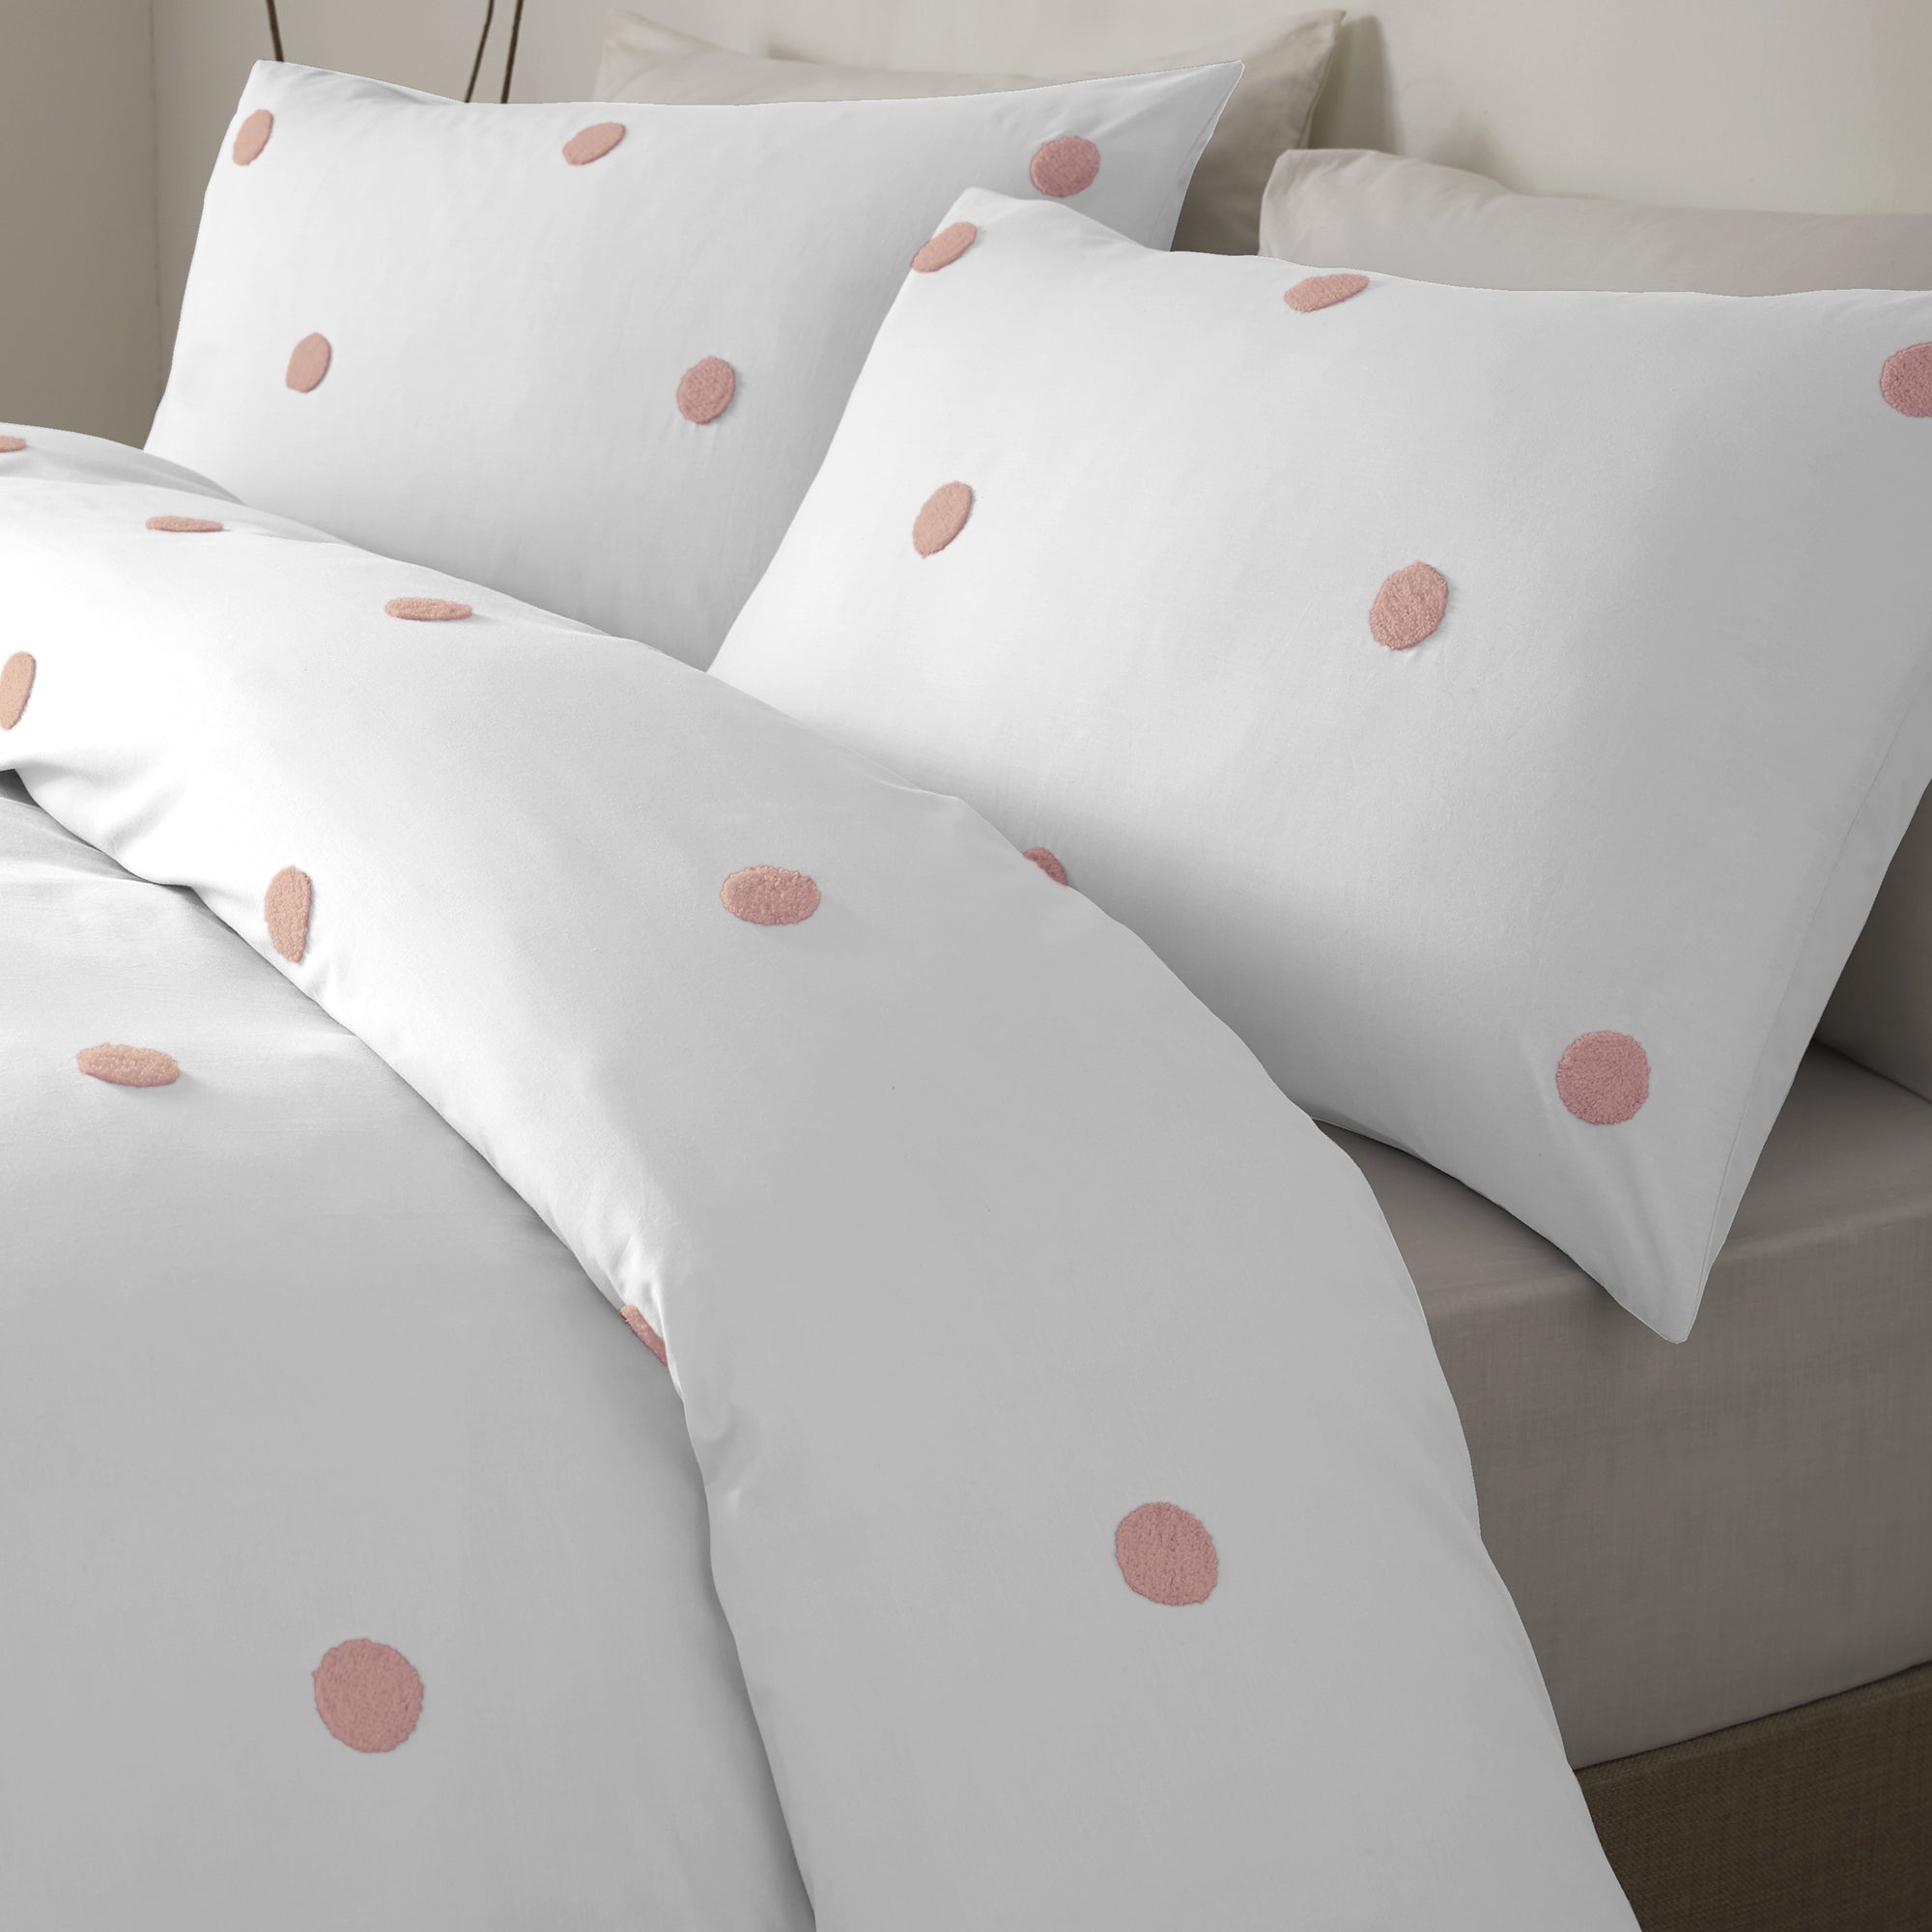 Dot Garden - 100% Cotton Duvet Cover Set in White & Pink - by Appletree Boutique